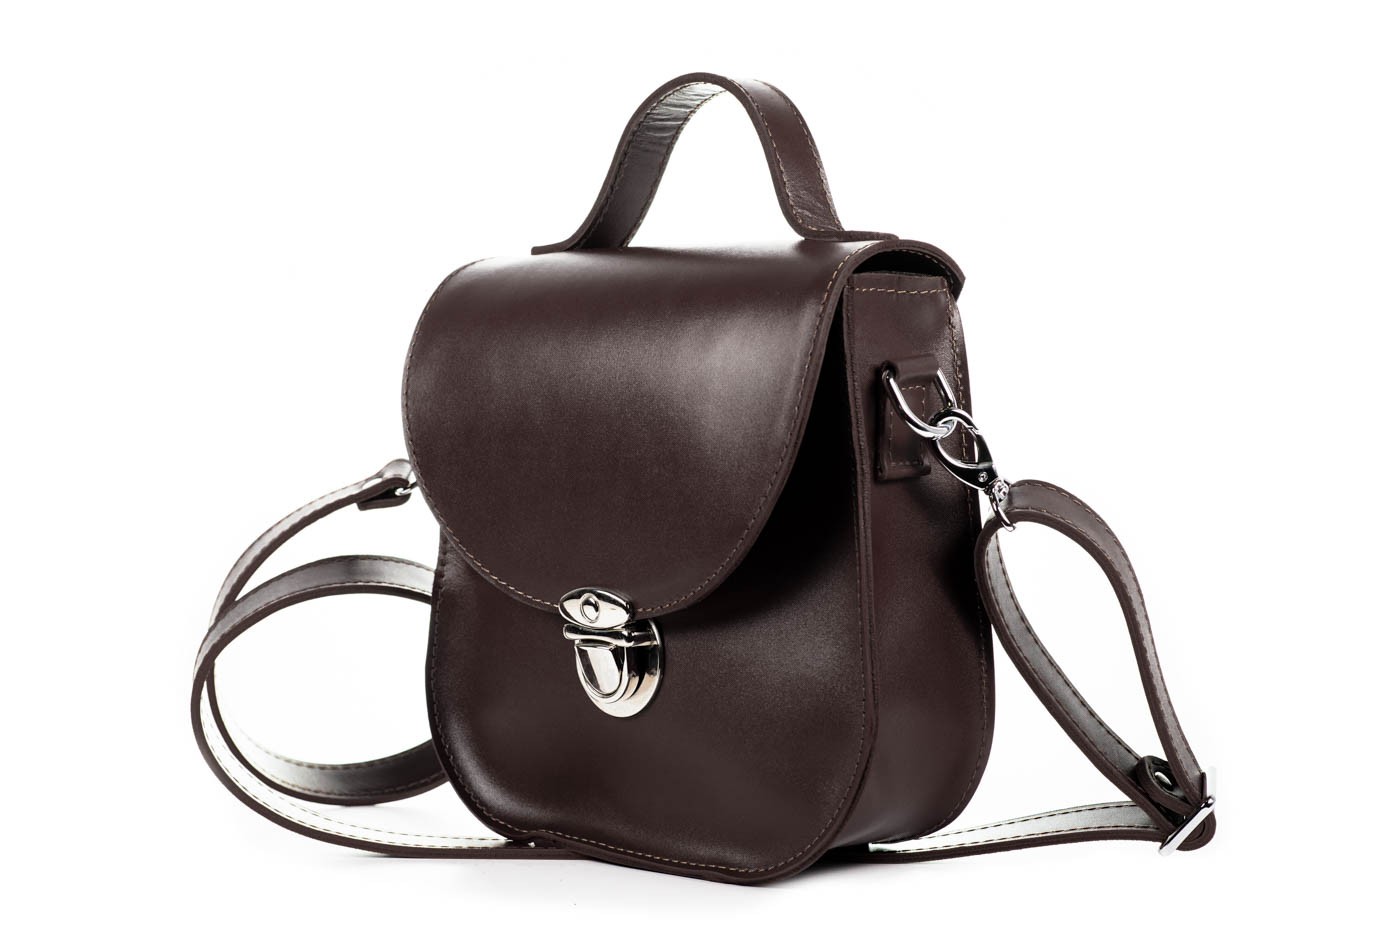 LEATHER BAG BLOSSOM BROWN